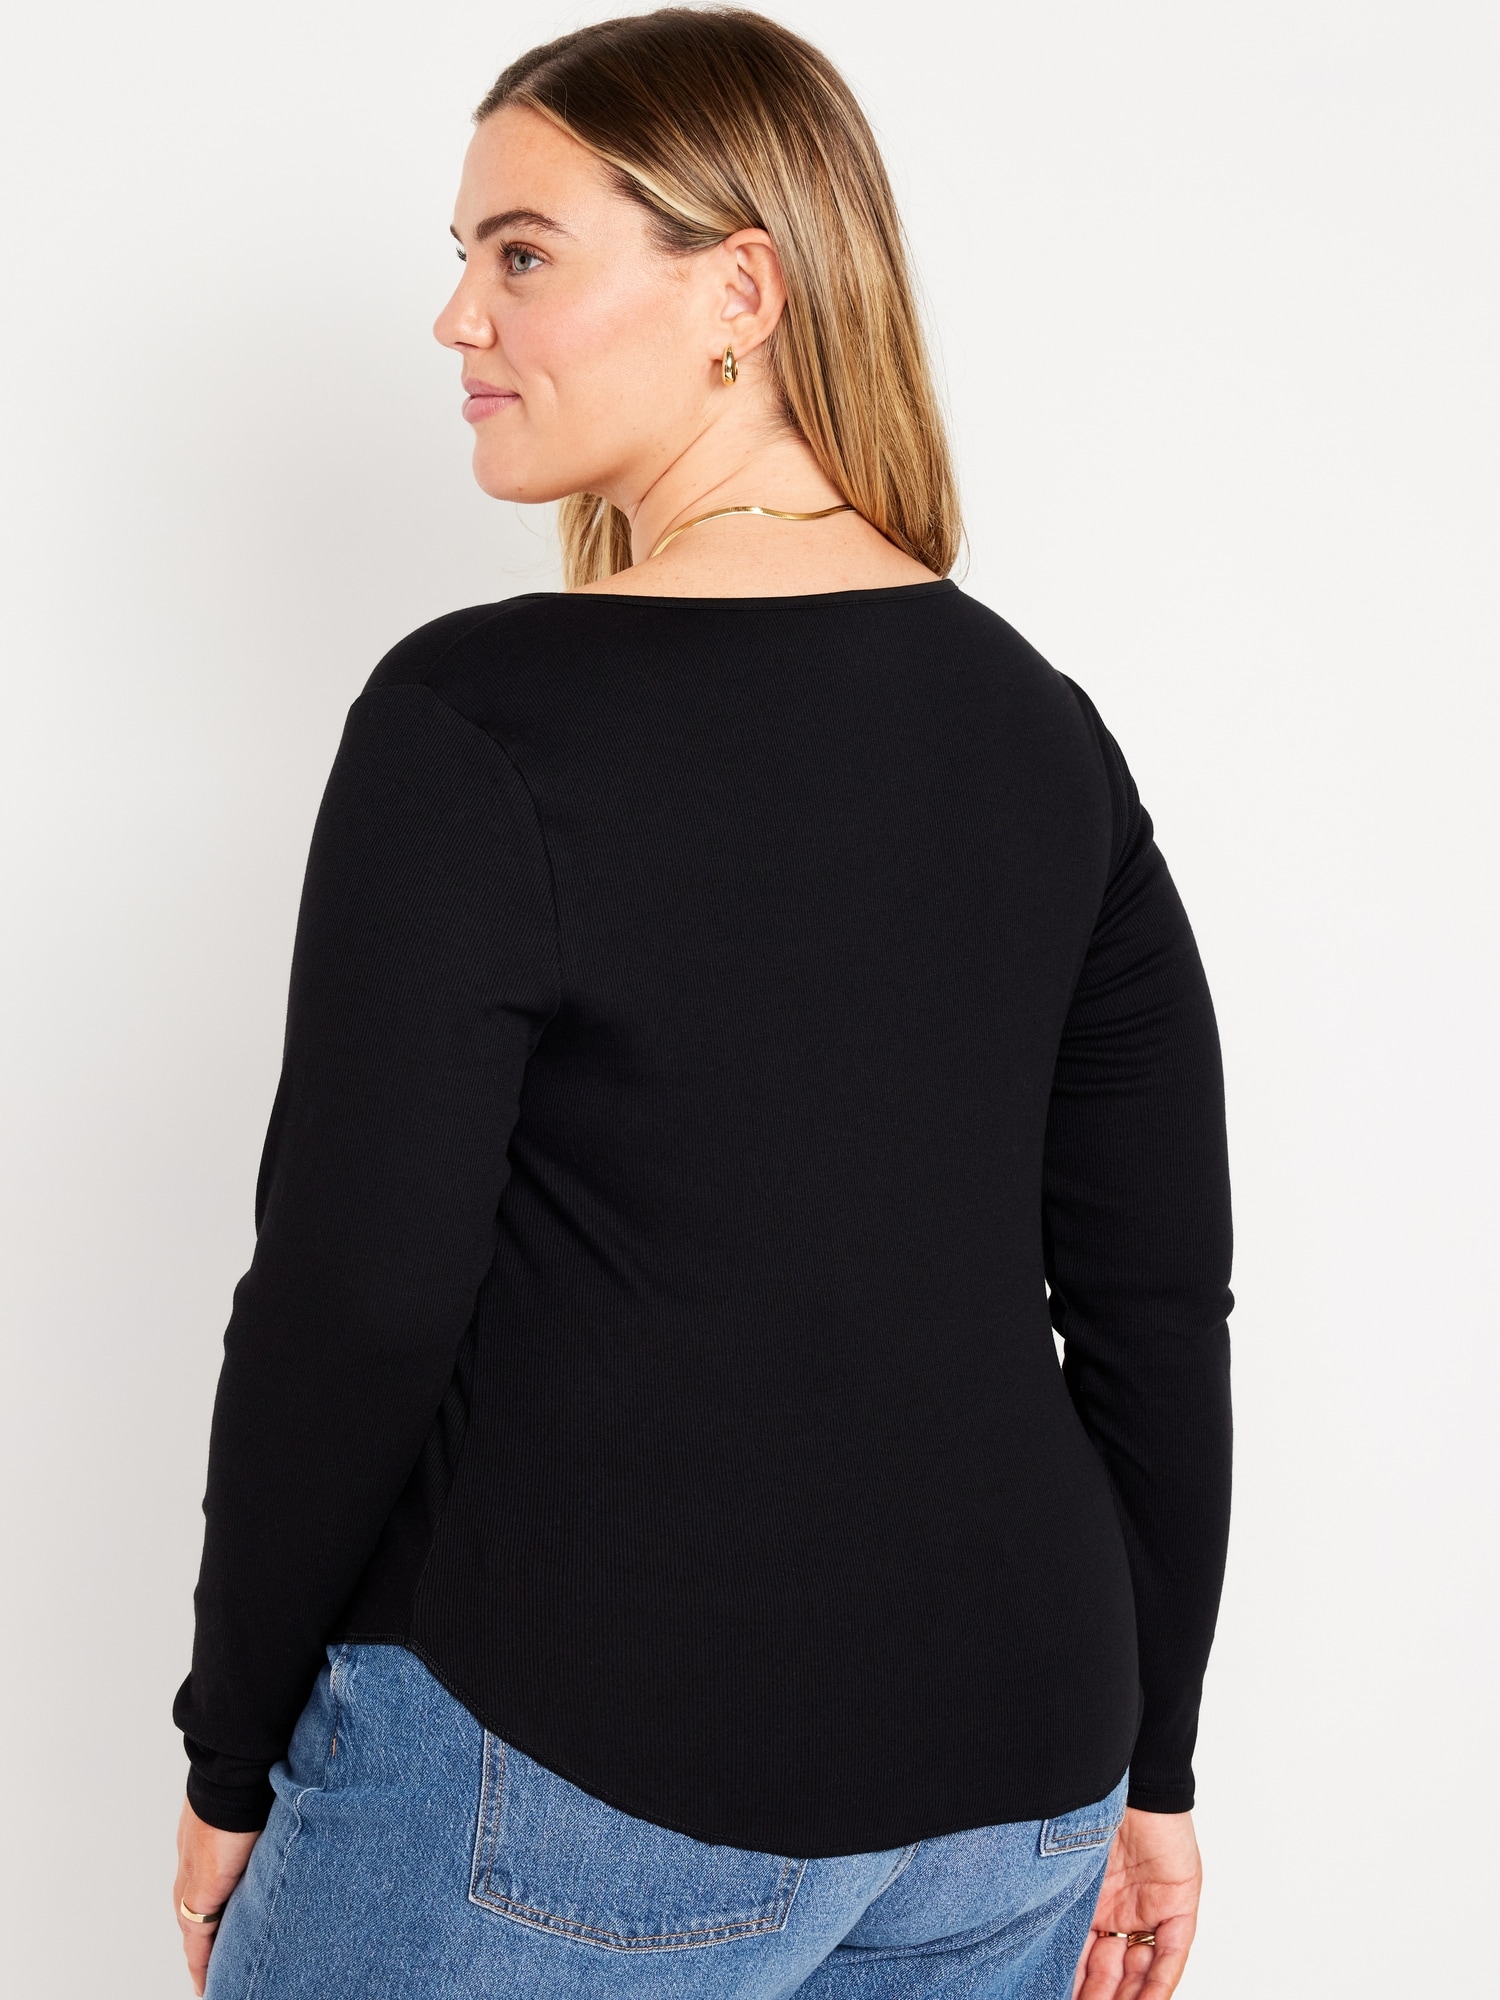 Fitted Women | Navy for Old T-Shirt Long-Sleeve Rib-Knit